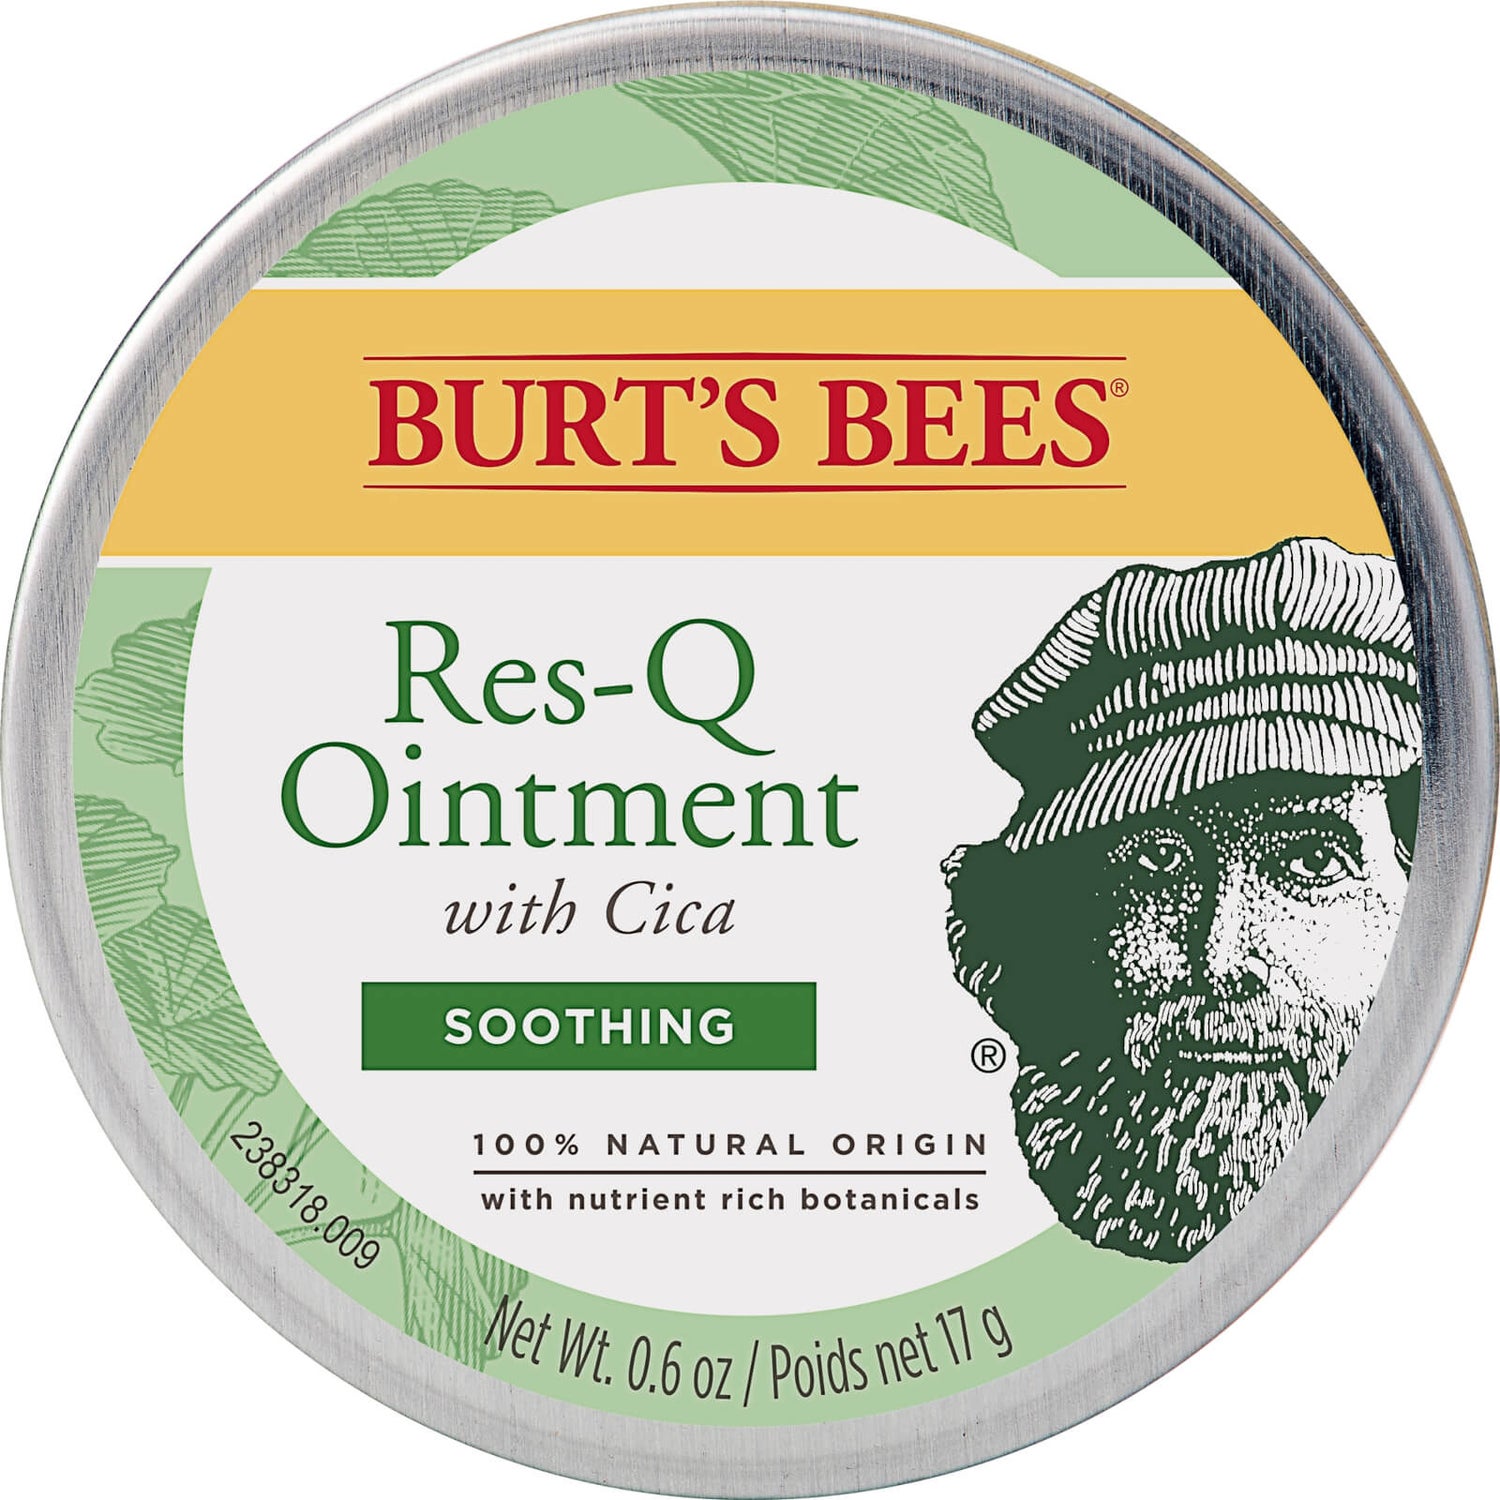 100% Natural Origin Multipurpose Res-Q Ointment with Cica, 15g